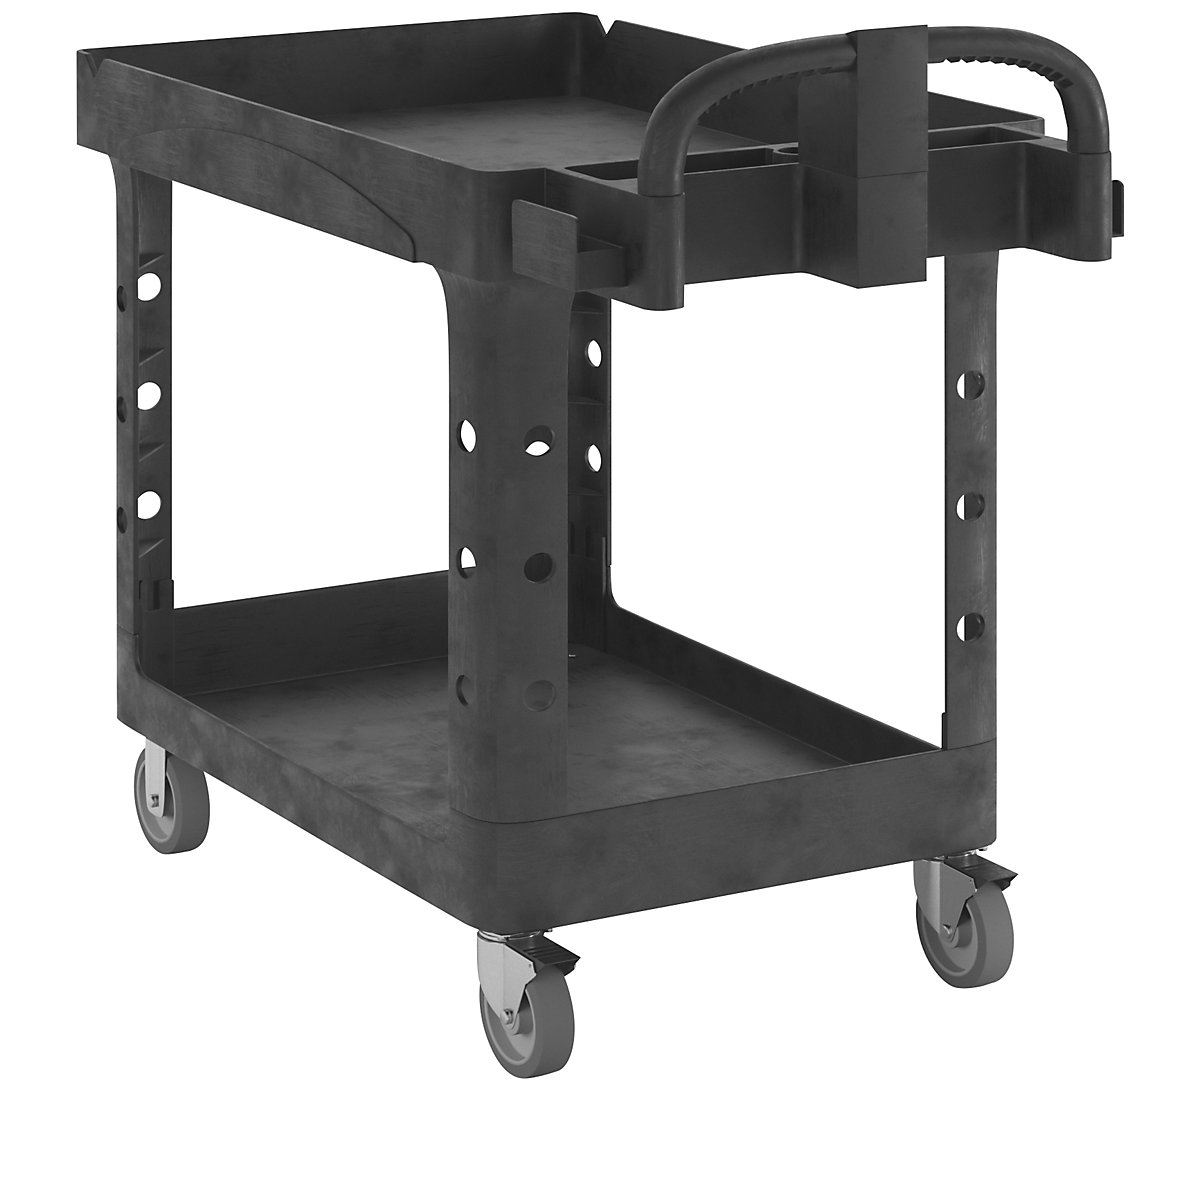 General purpose table trolley made of plastic – Rubbermaid, shelves with raised edges, LxWxH 1120 x 640 x 980 mm-9